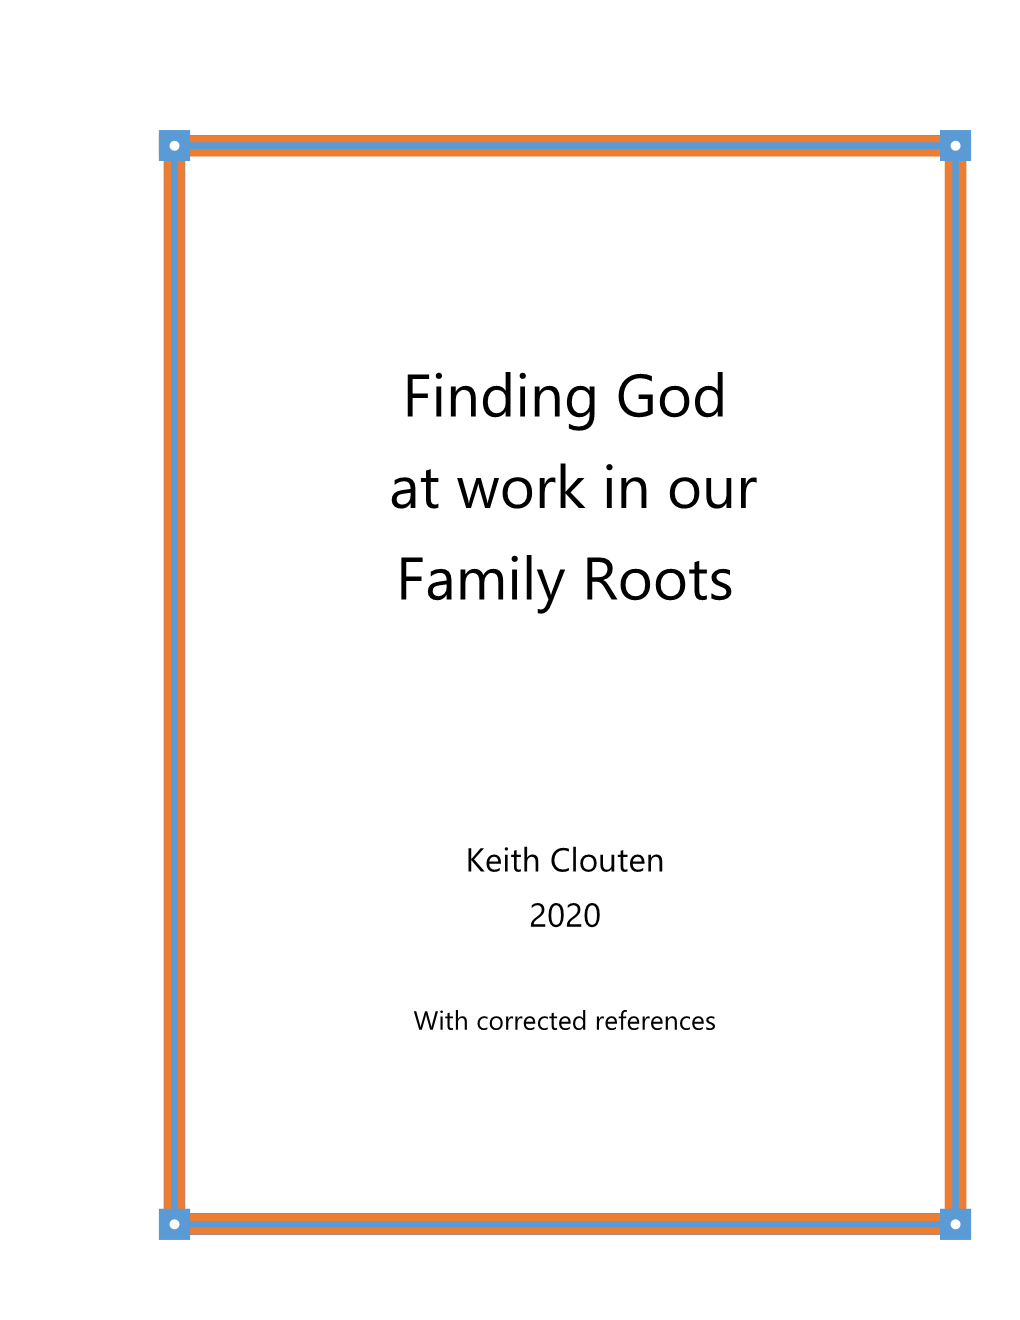 Finding God at Work in Our Family Roots